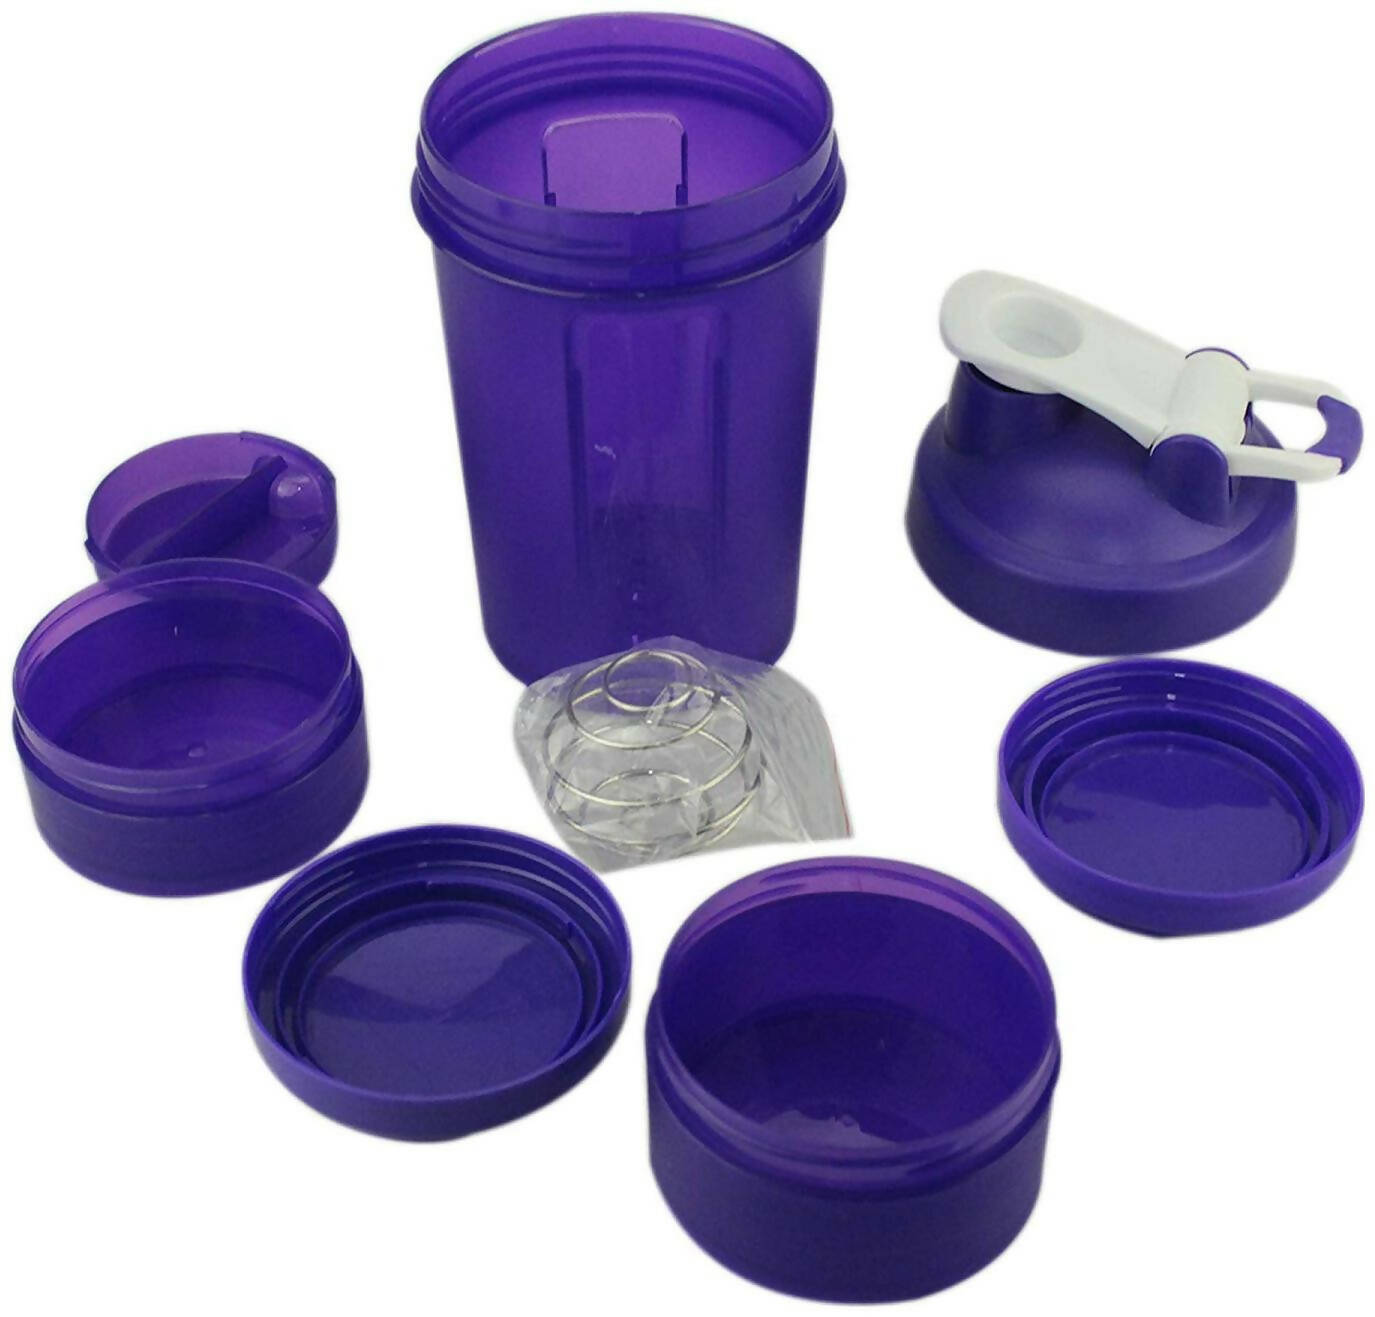 3 in 1 Sports Shaker Bottle For Gym - Storage & Pill Compartments - 450ml - Purple